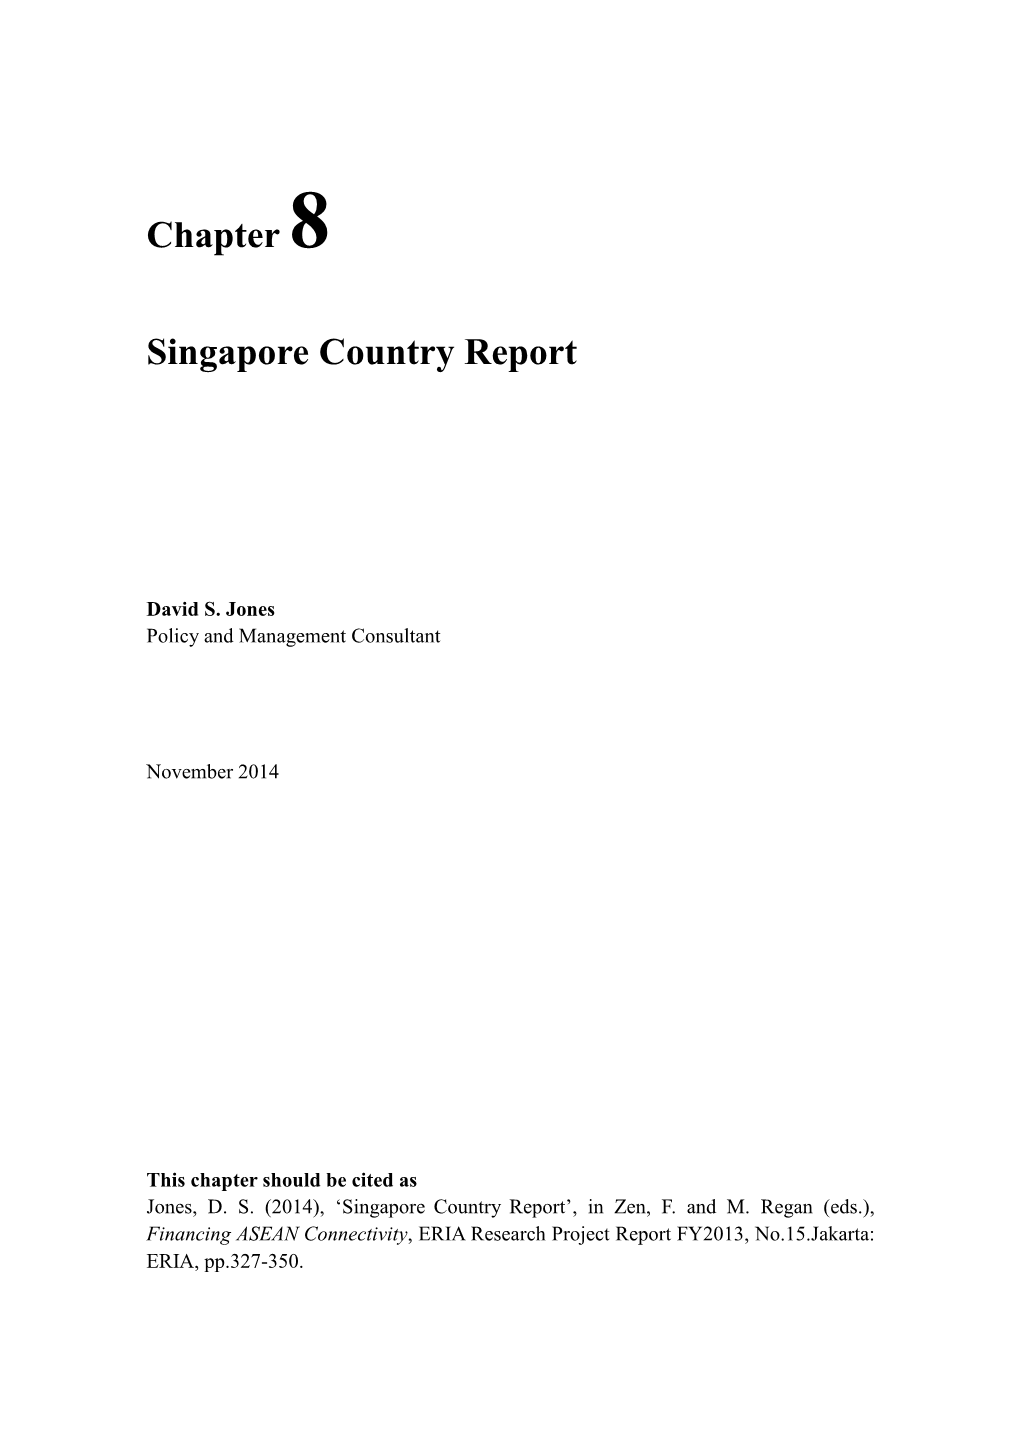 Chapter 8 Singapore Country Report